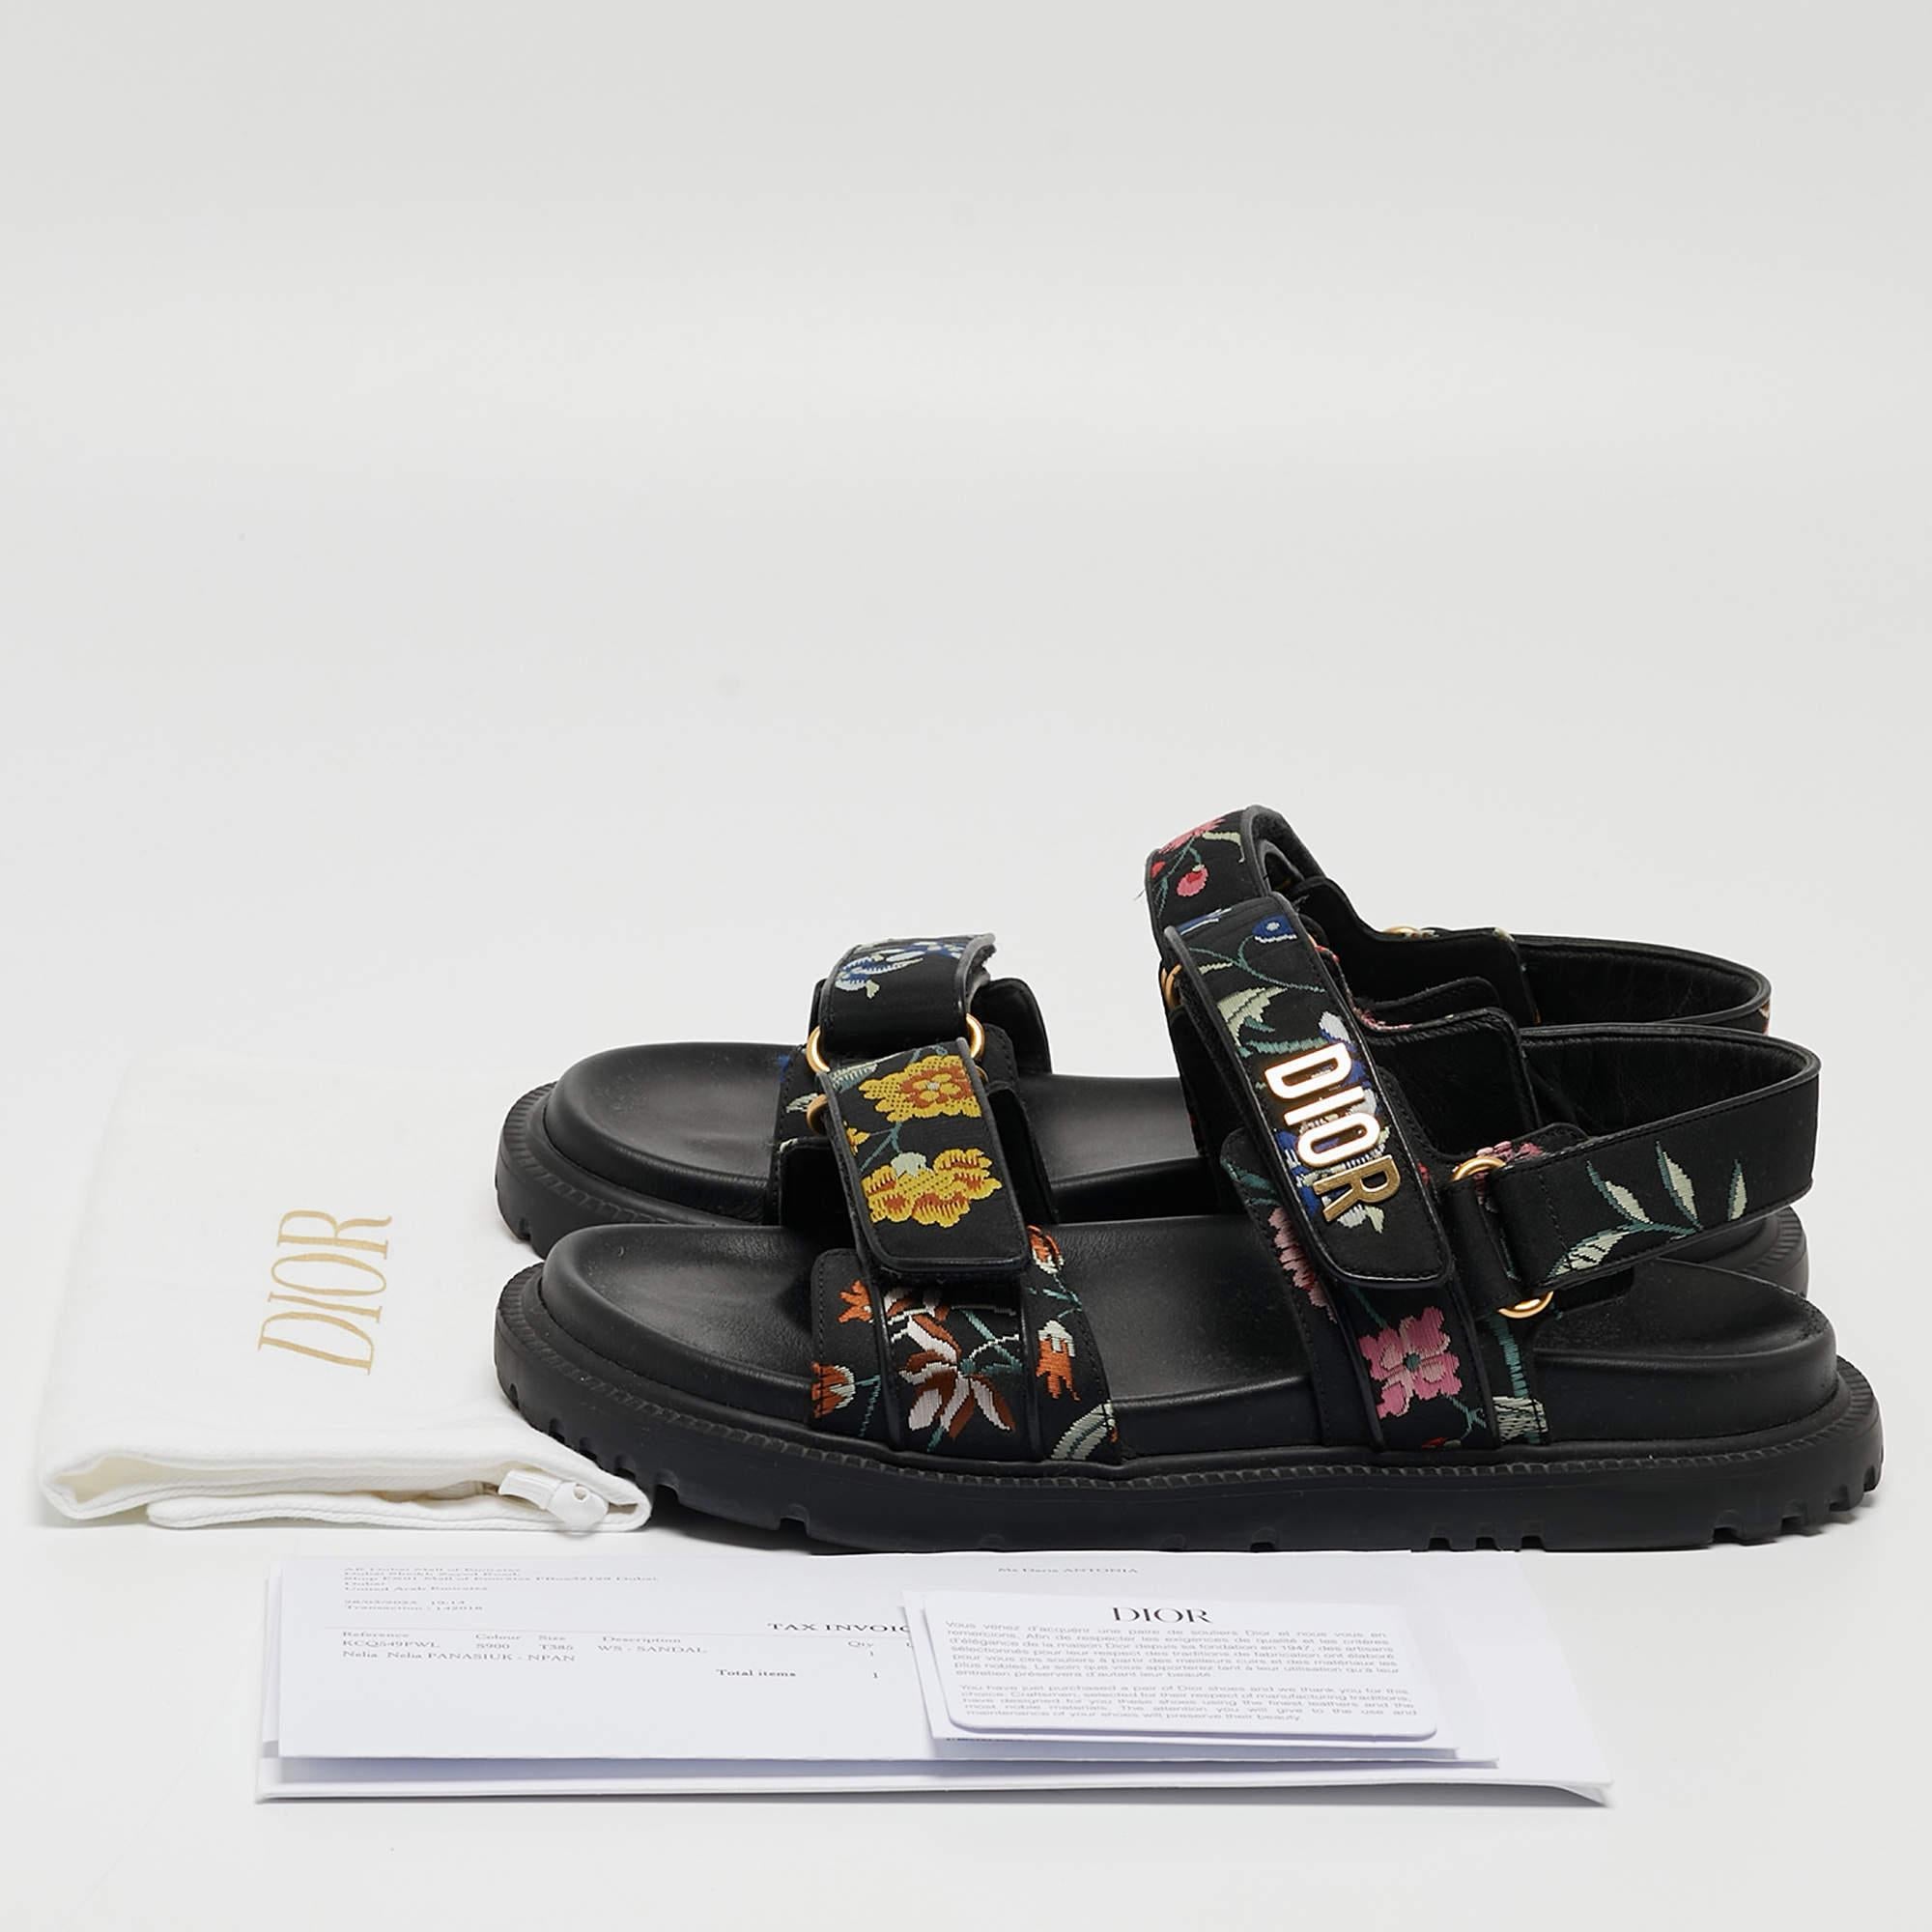 Dior Black Floral Print Fabric DiorAct Sandals Size 38.5 5